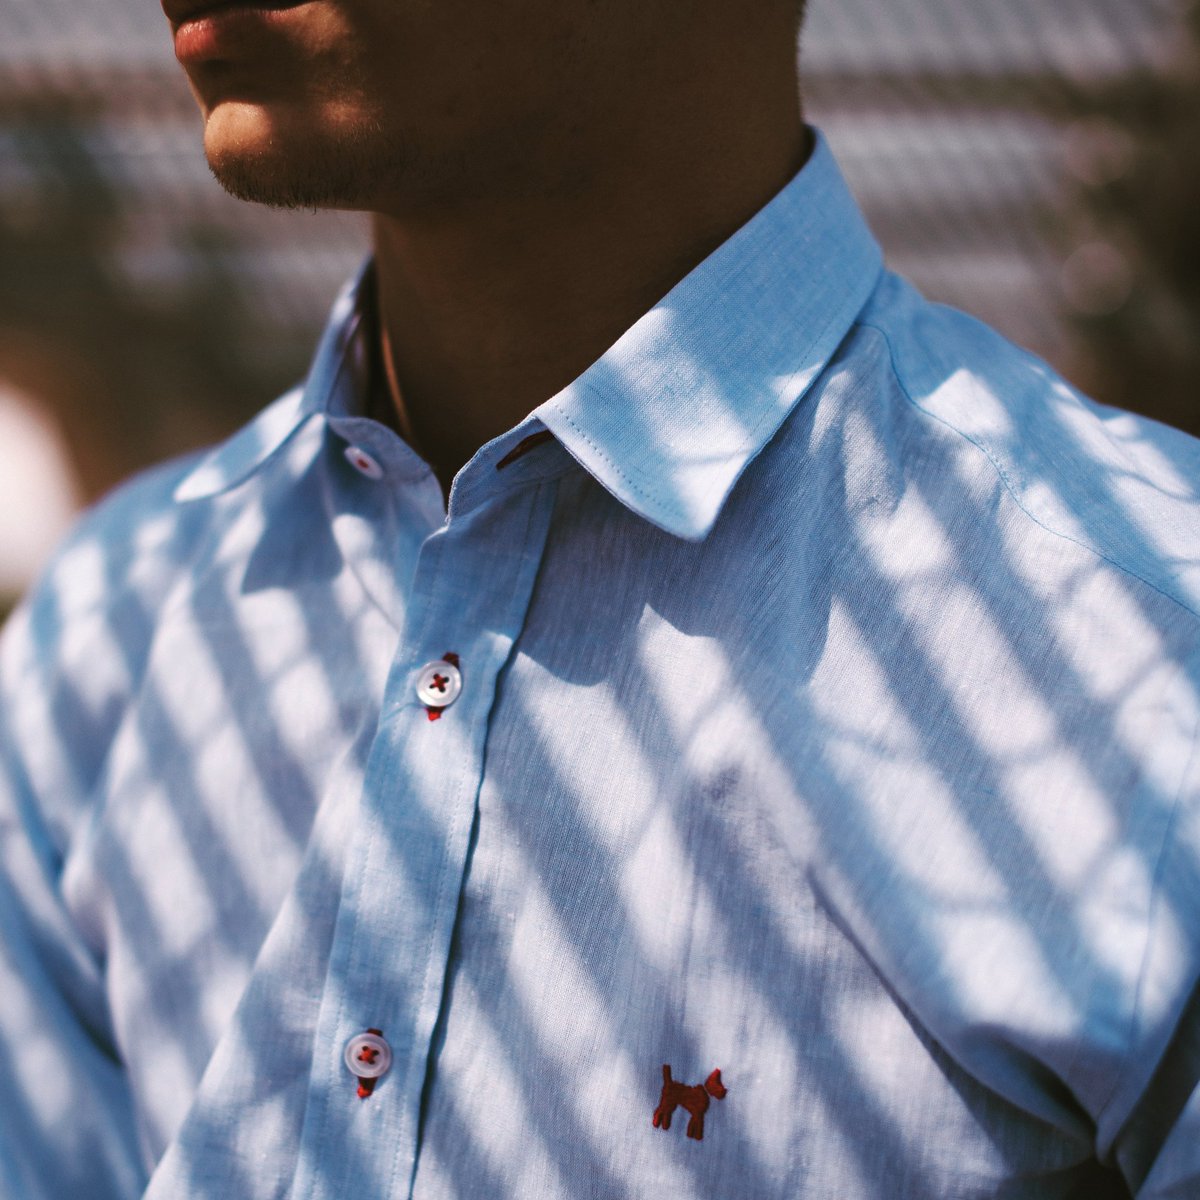 Stylish shirts all made in Europe could be yours today at williot.co.uk #madeineurope #dappergent #purecotton #cottonshirt #preppydresser #style #mensfashion #stylishshirts #blueshirt #fashionablemen #menwithstyle #streetfashion #smartcasual #ss18 #ootdmen #spring18